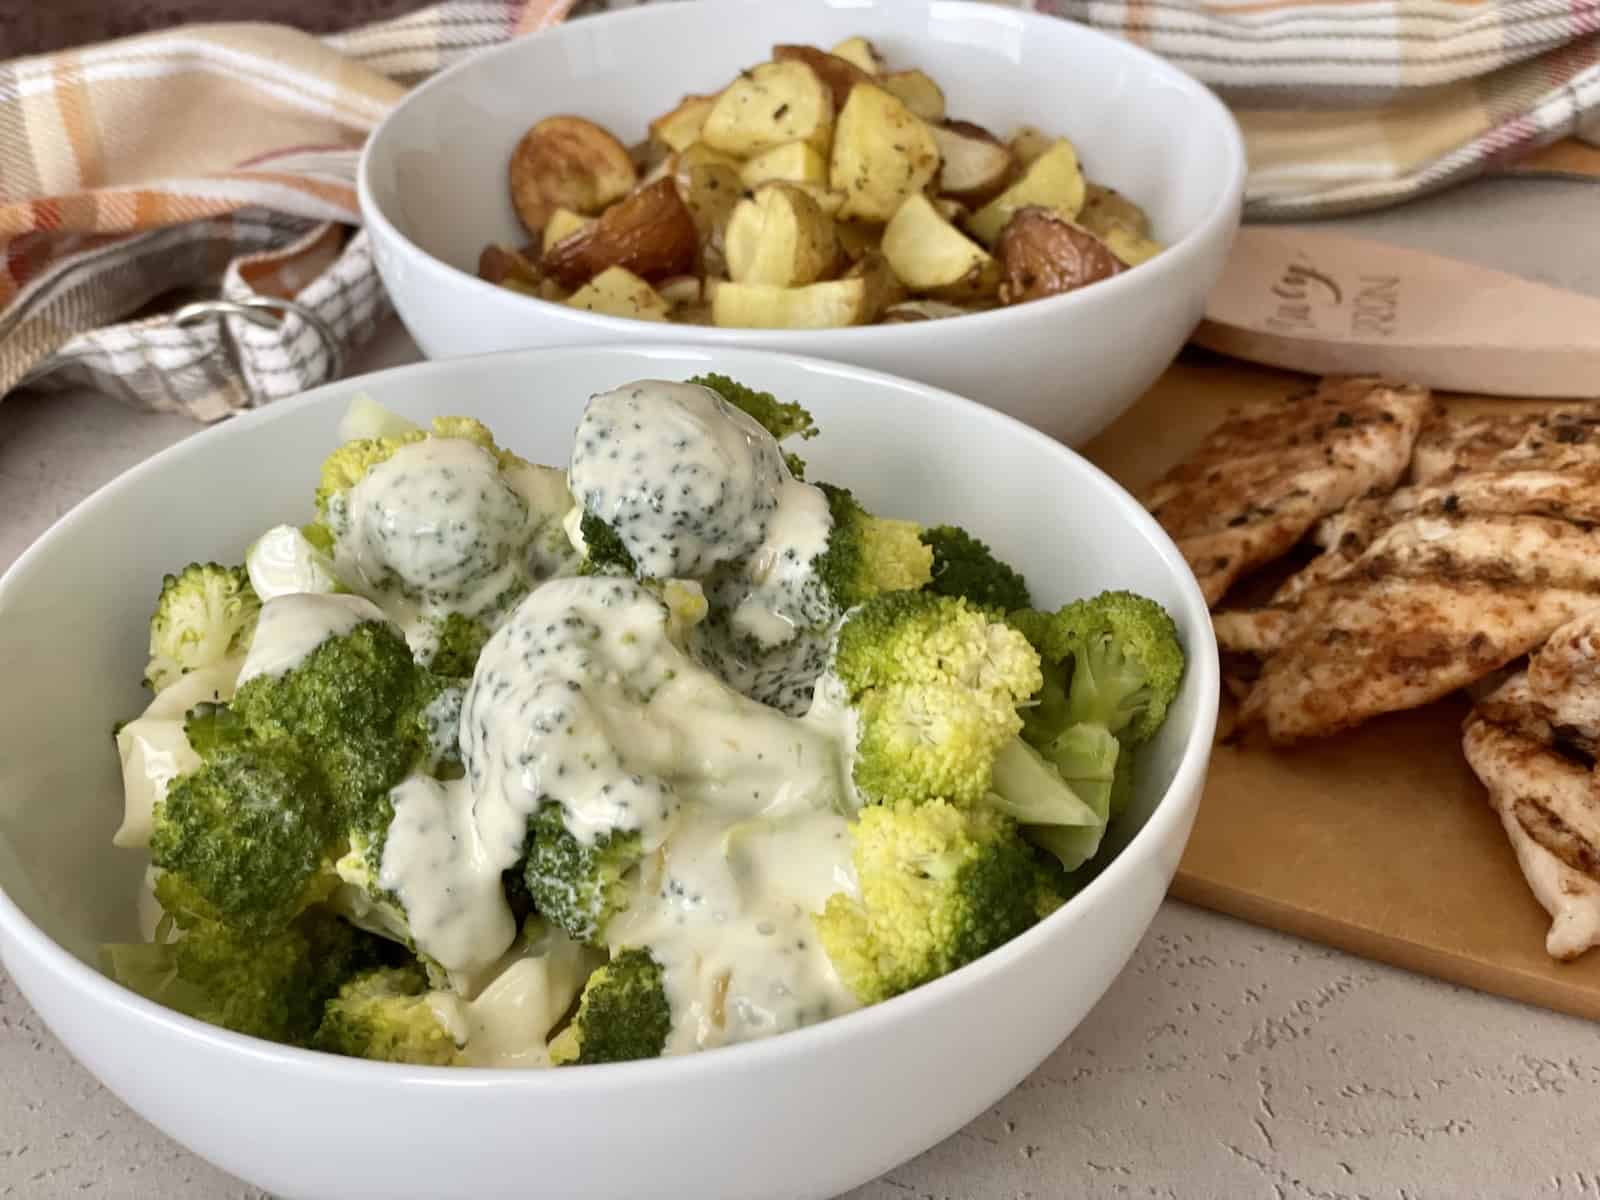 a bowl of bright green broccoli with flourless cheese sauce poured over served next to a bowl of roasted potatoes and grilled chicken on a wood cutting board